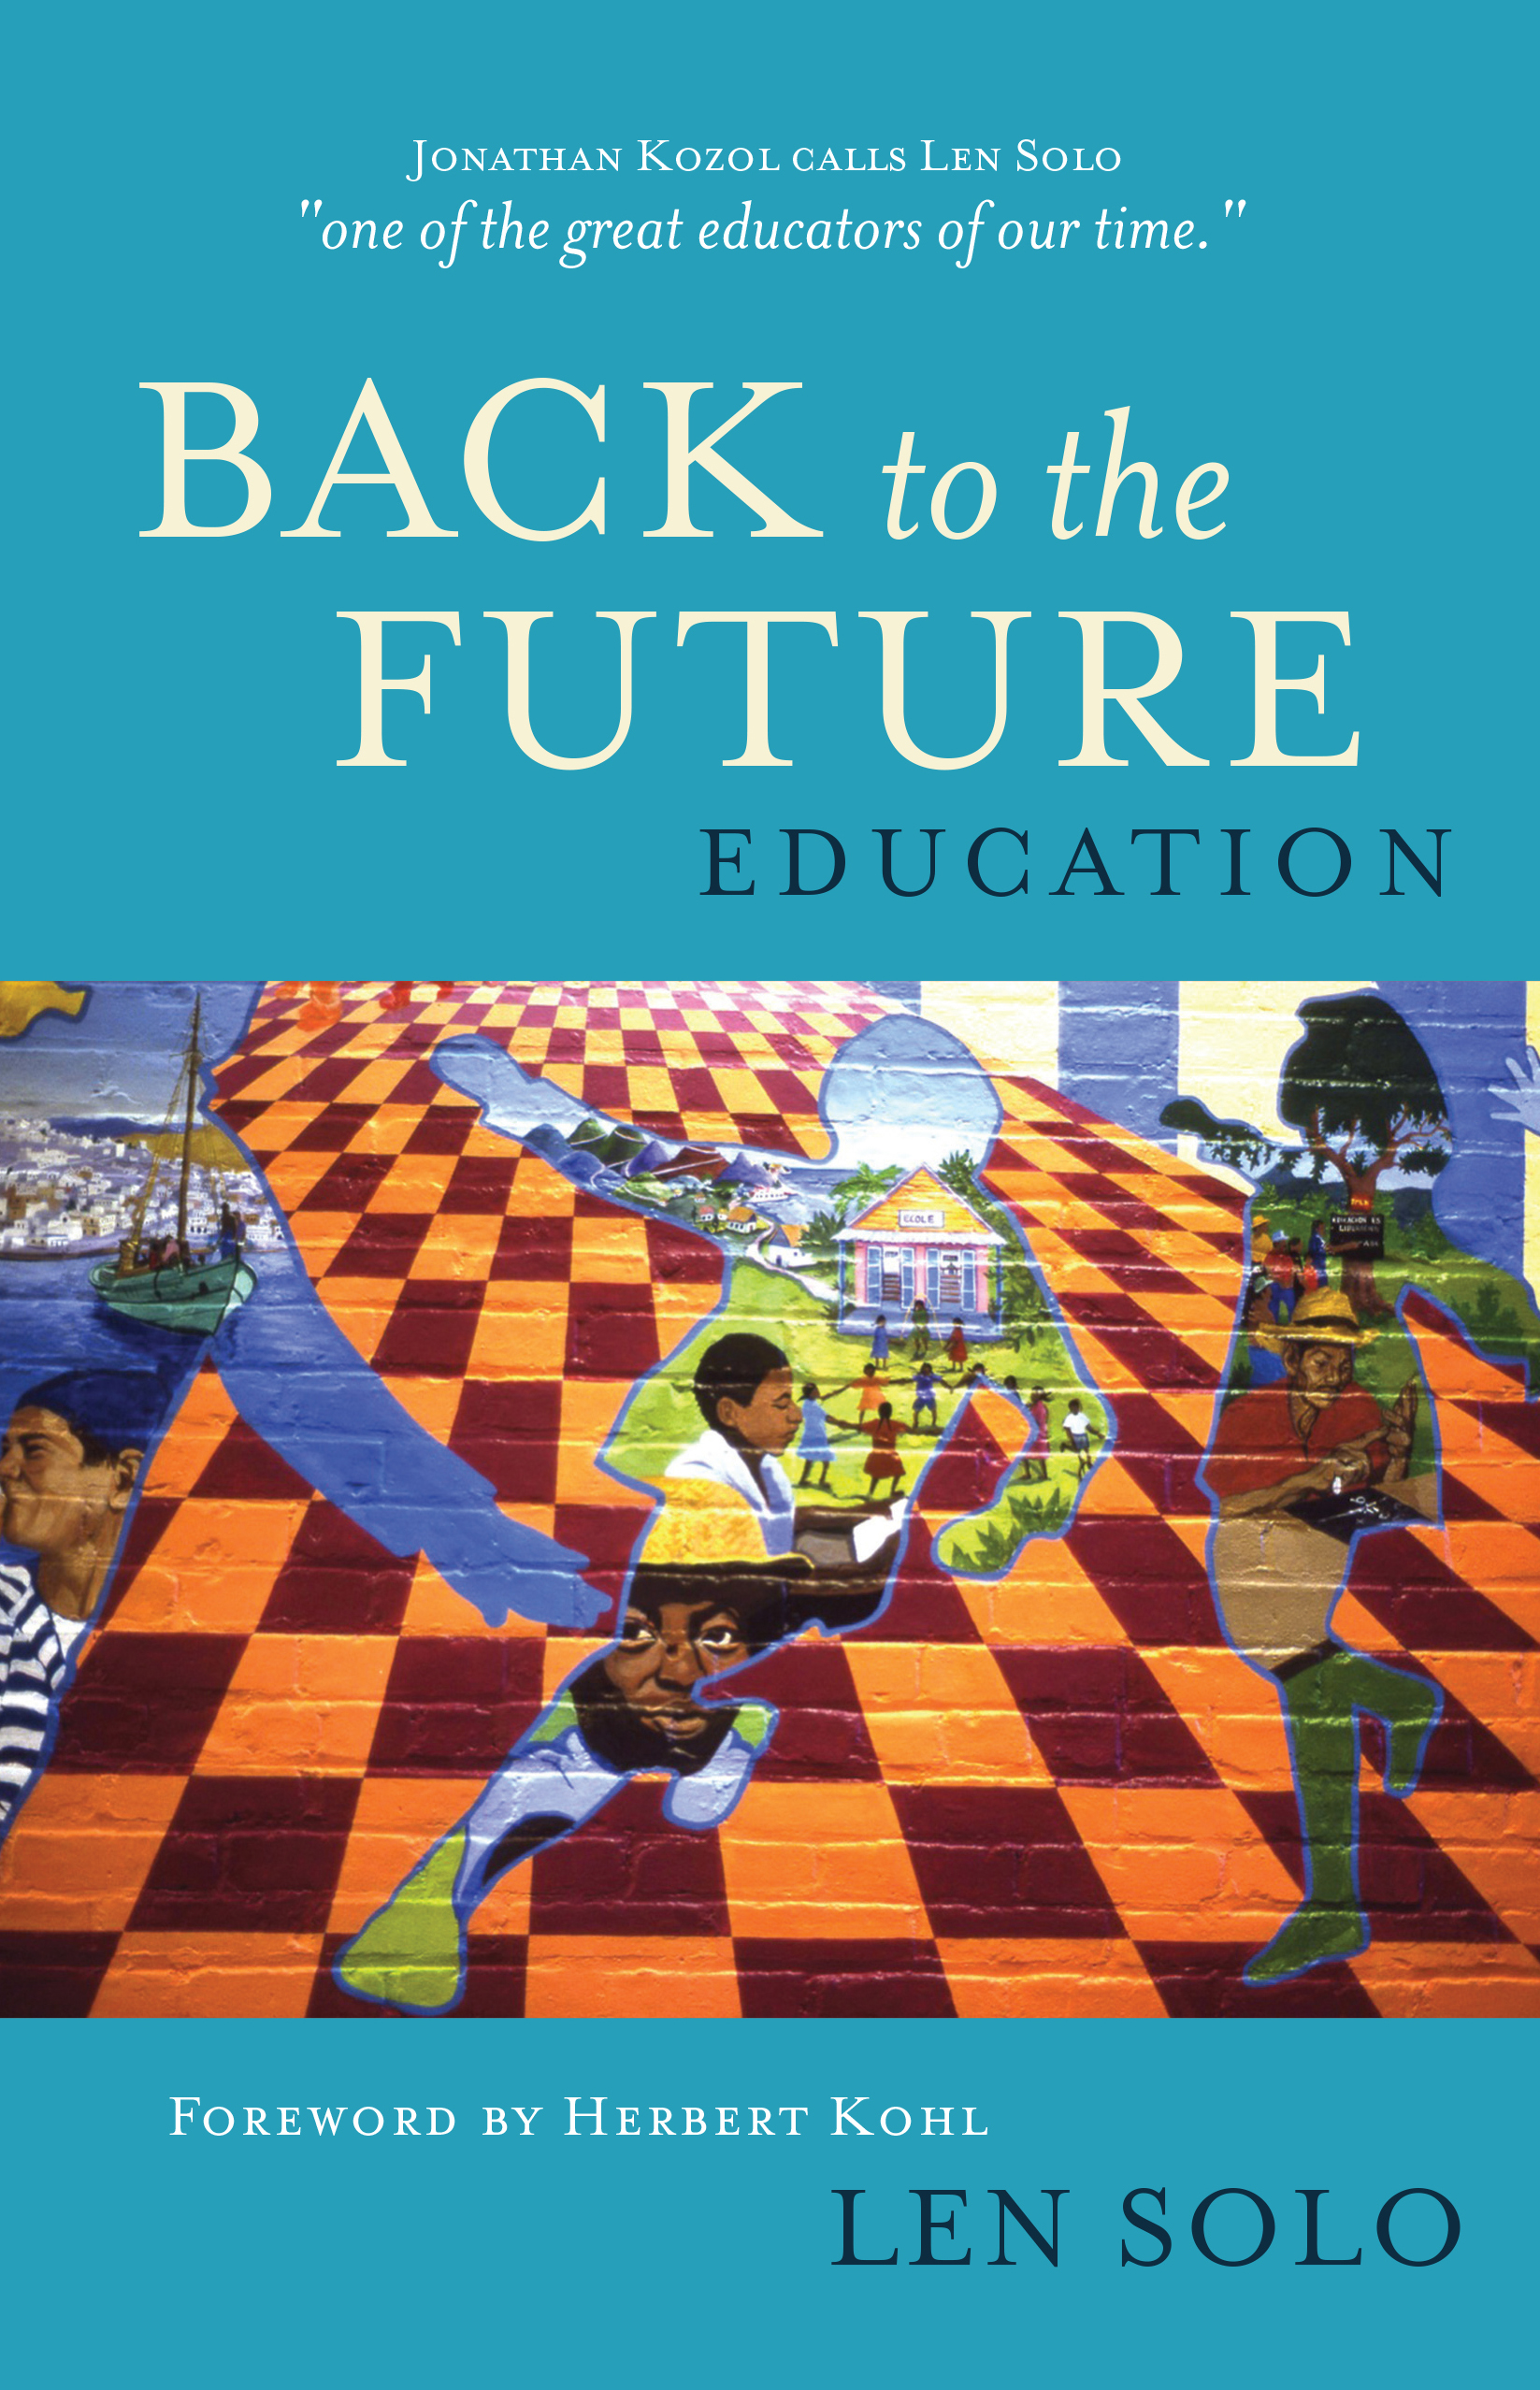 Education: Back to the Future by Len Solo